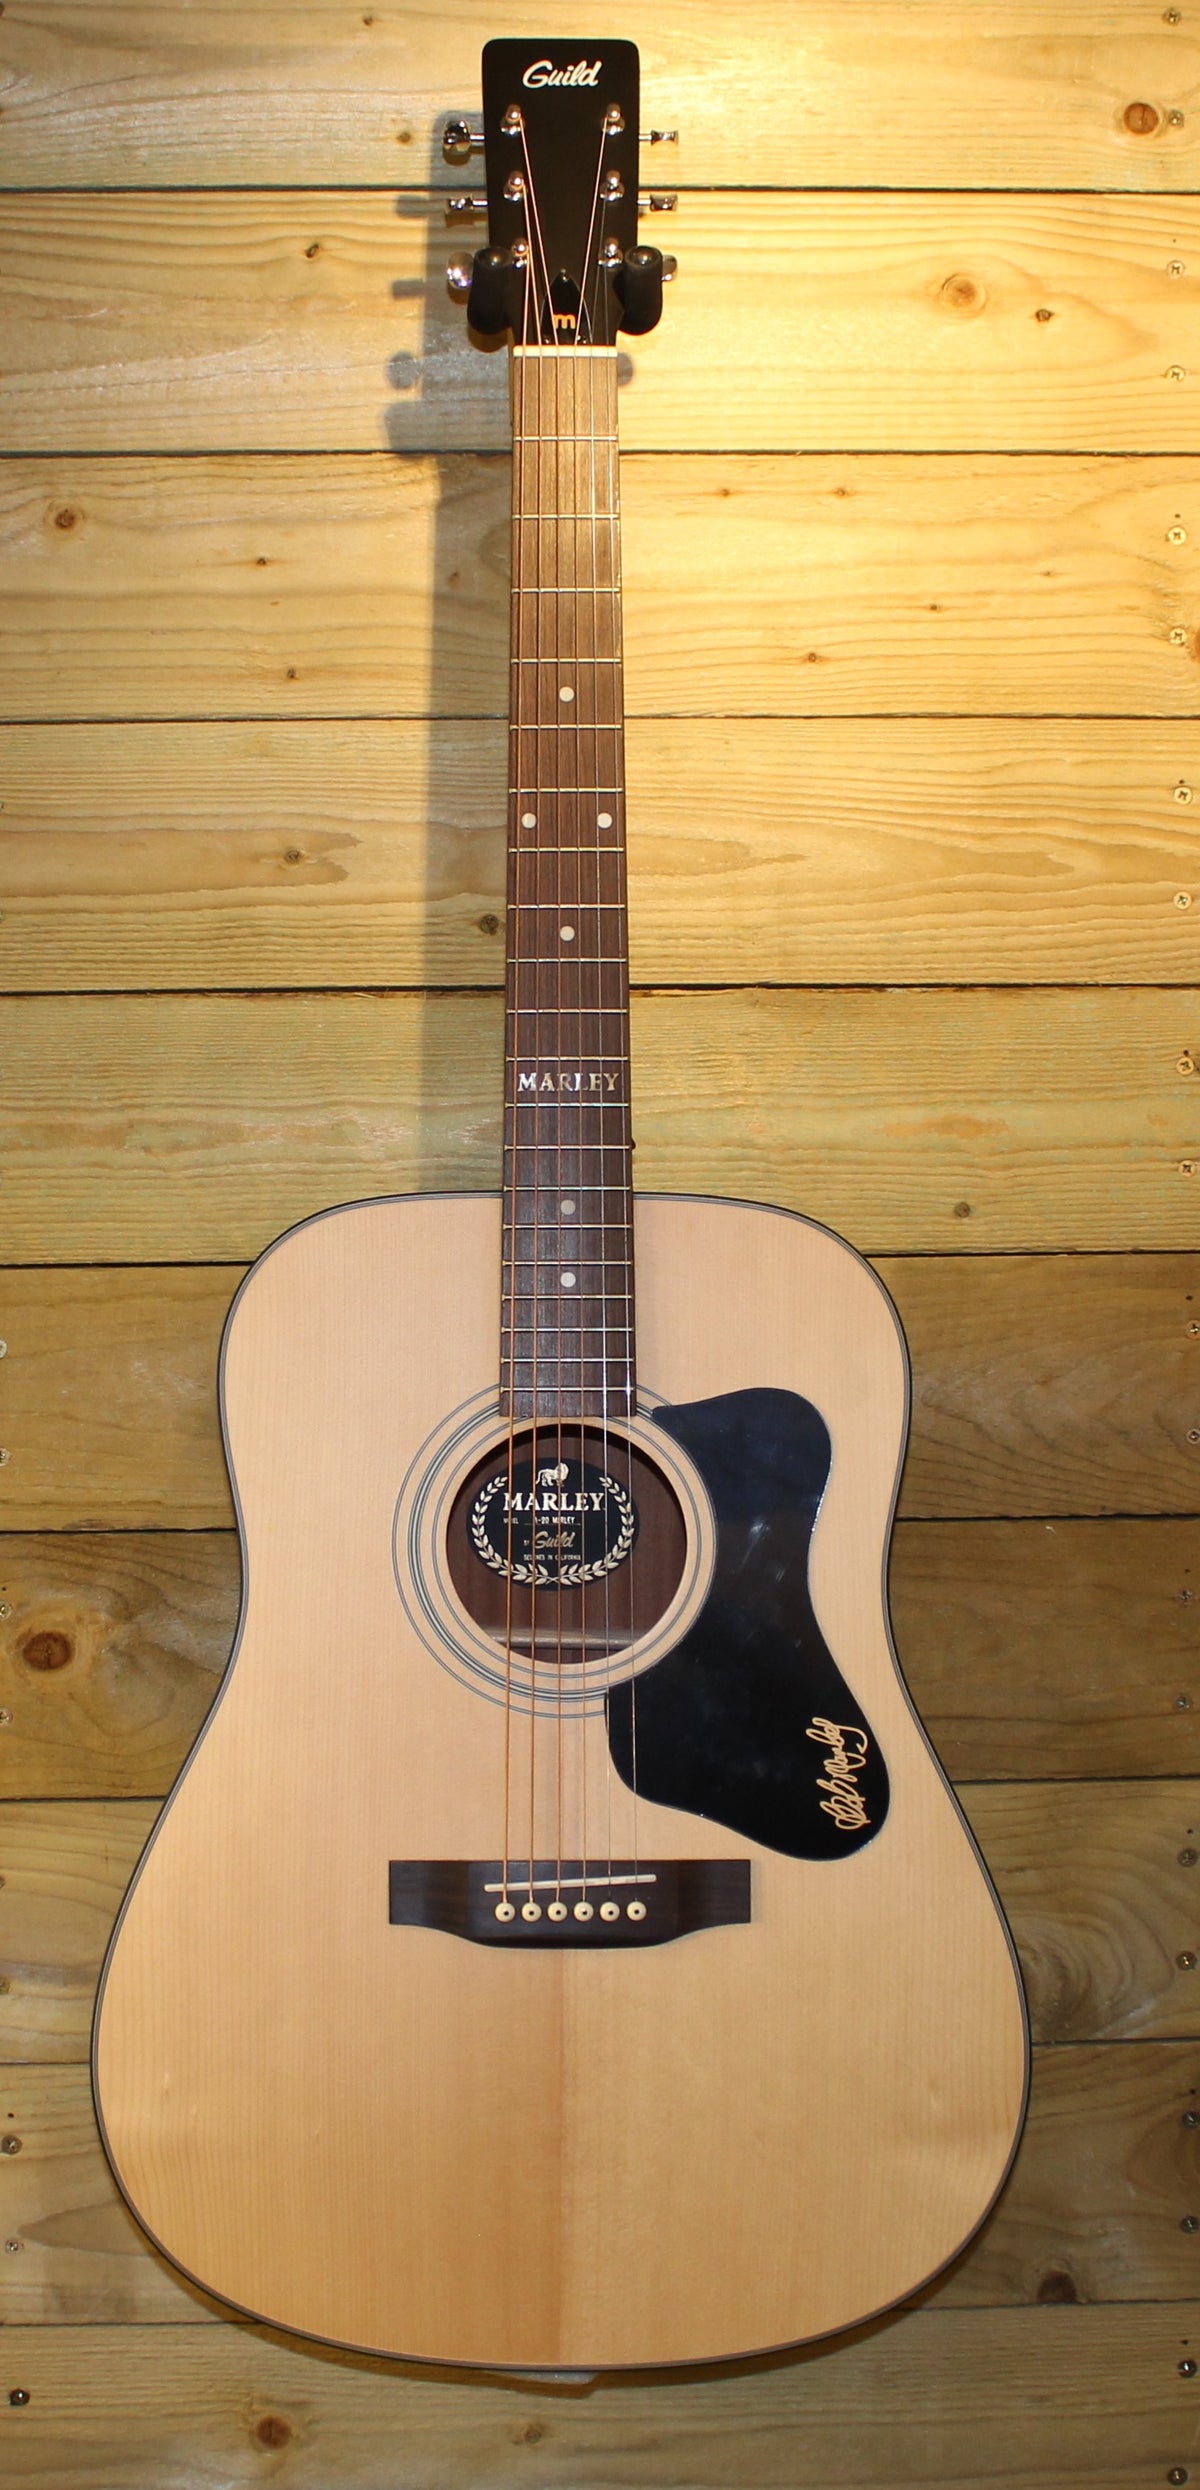 Guild A-20 Bob Marley Tribute Dreadnought Acoustic